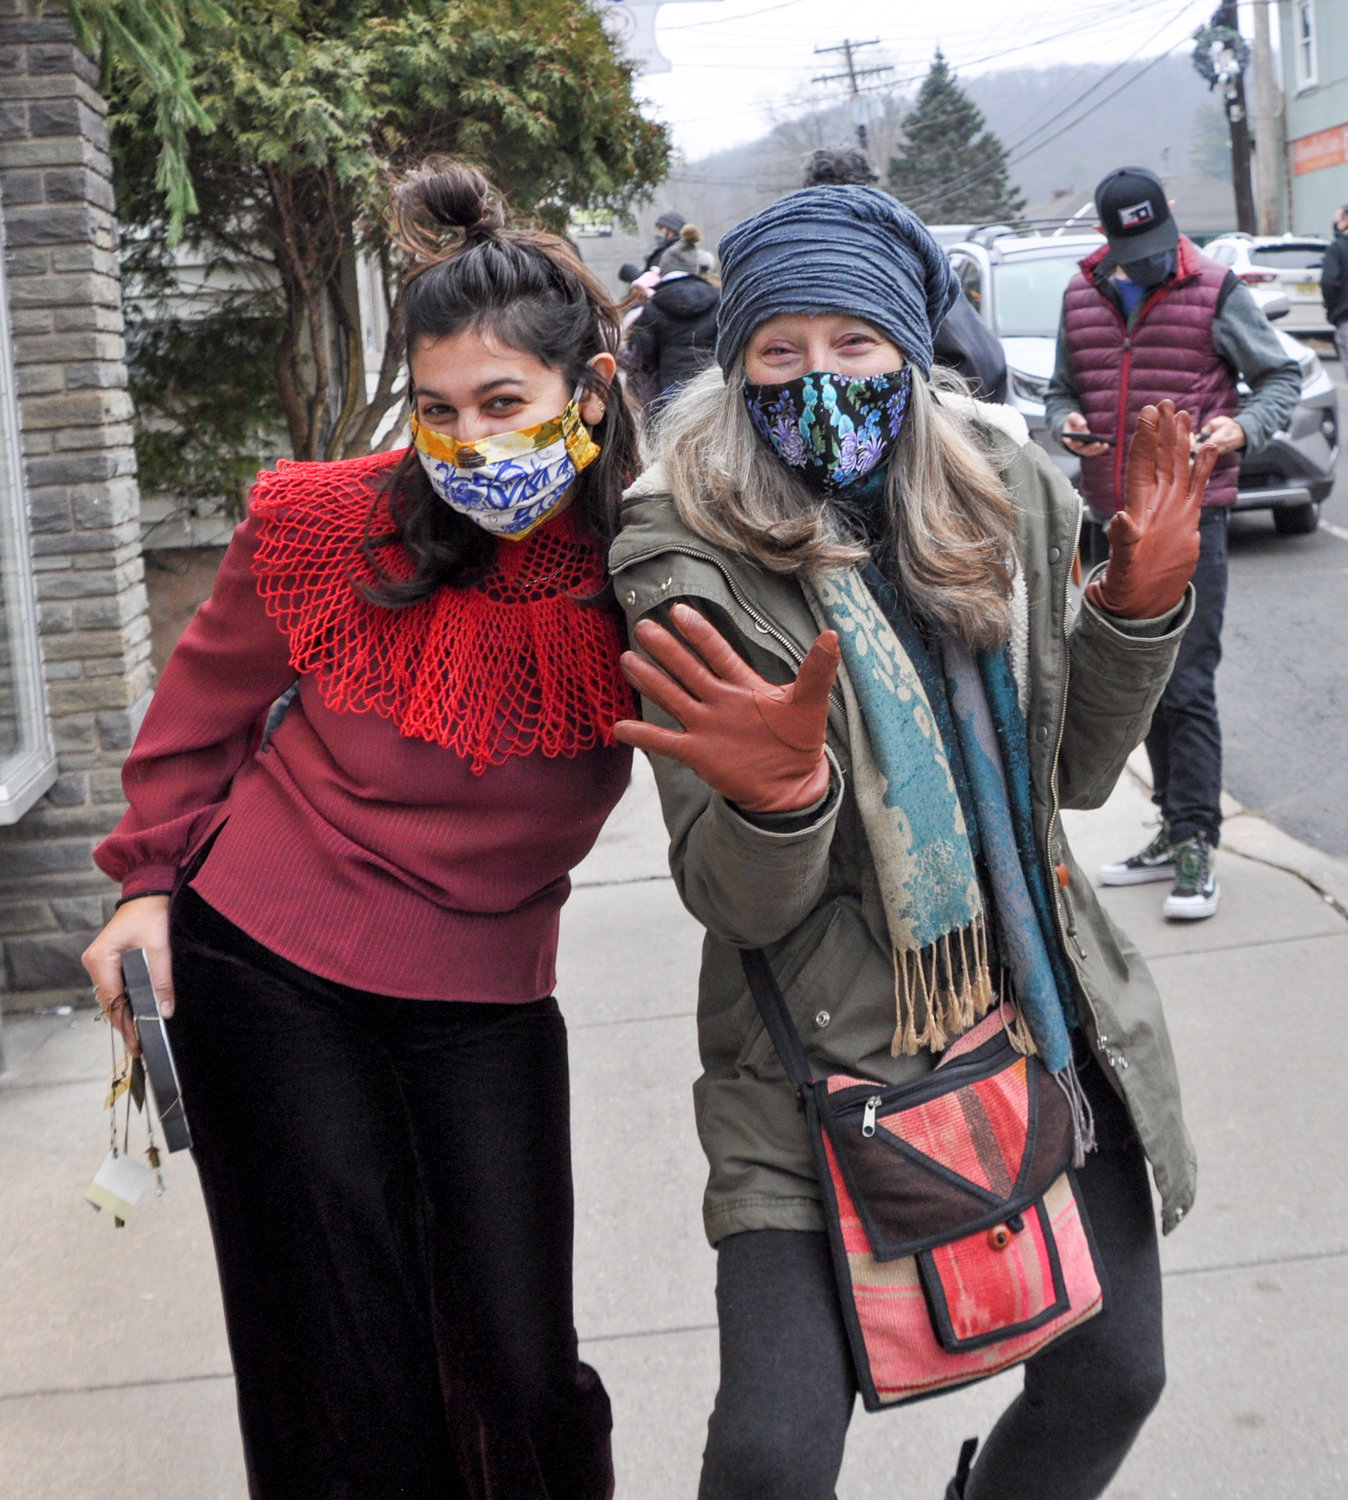 I took pictures of people I recognized (Paola Tawa, left, and Kazzrie Jaxen, clearly smiling behind the masks) because, having to keep my distance, I could spell their names without asking.